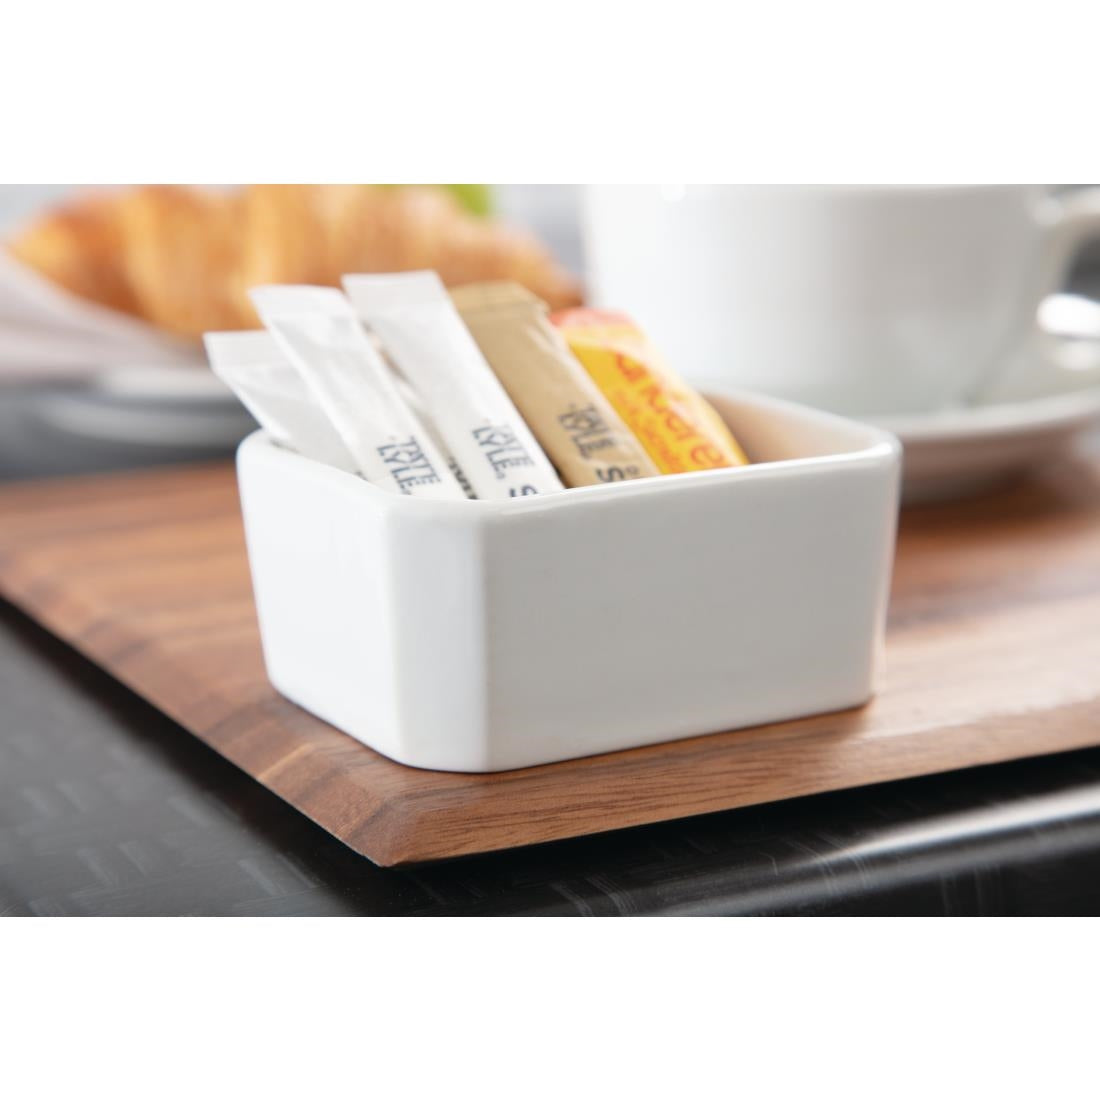 Athena Hotelware Sachet Holders (Pack of 6) JD Catering Equipment Solutions Ltd